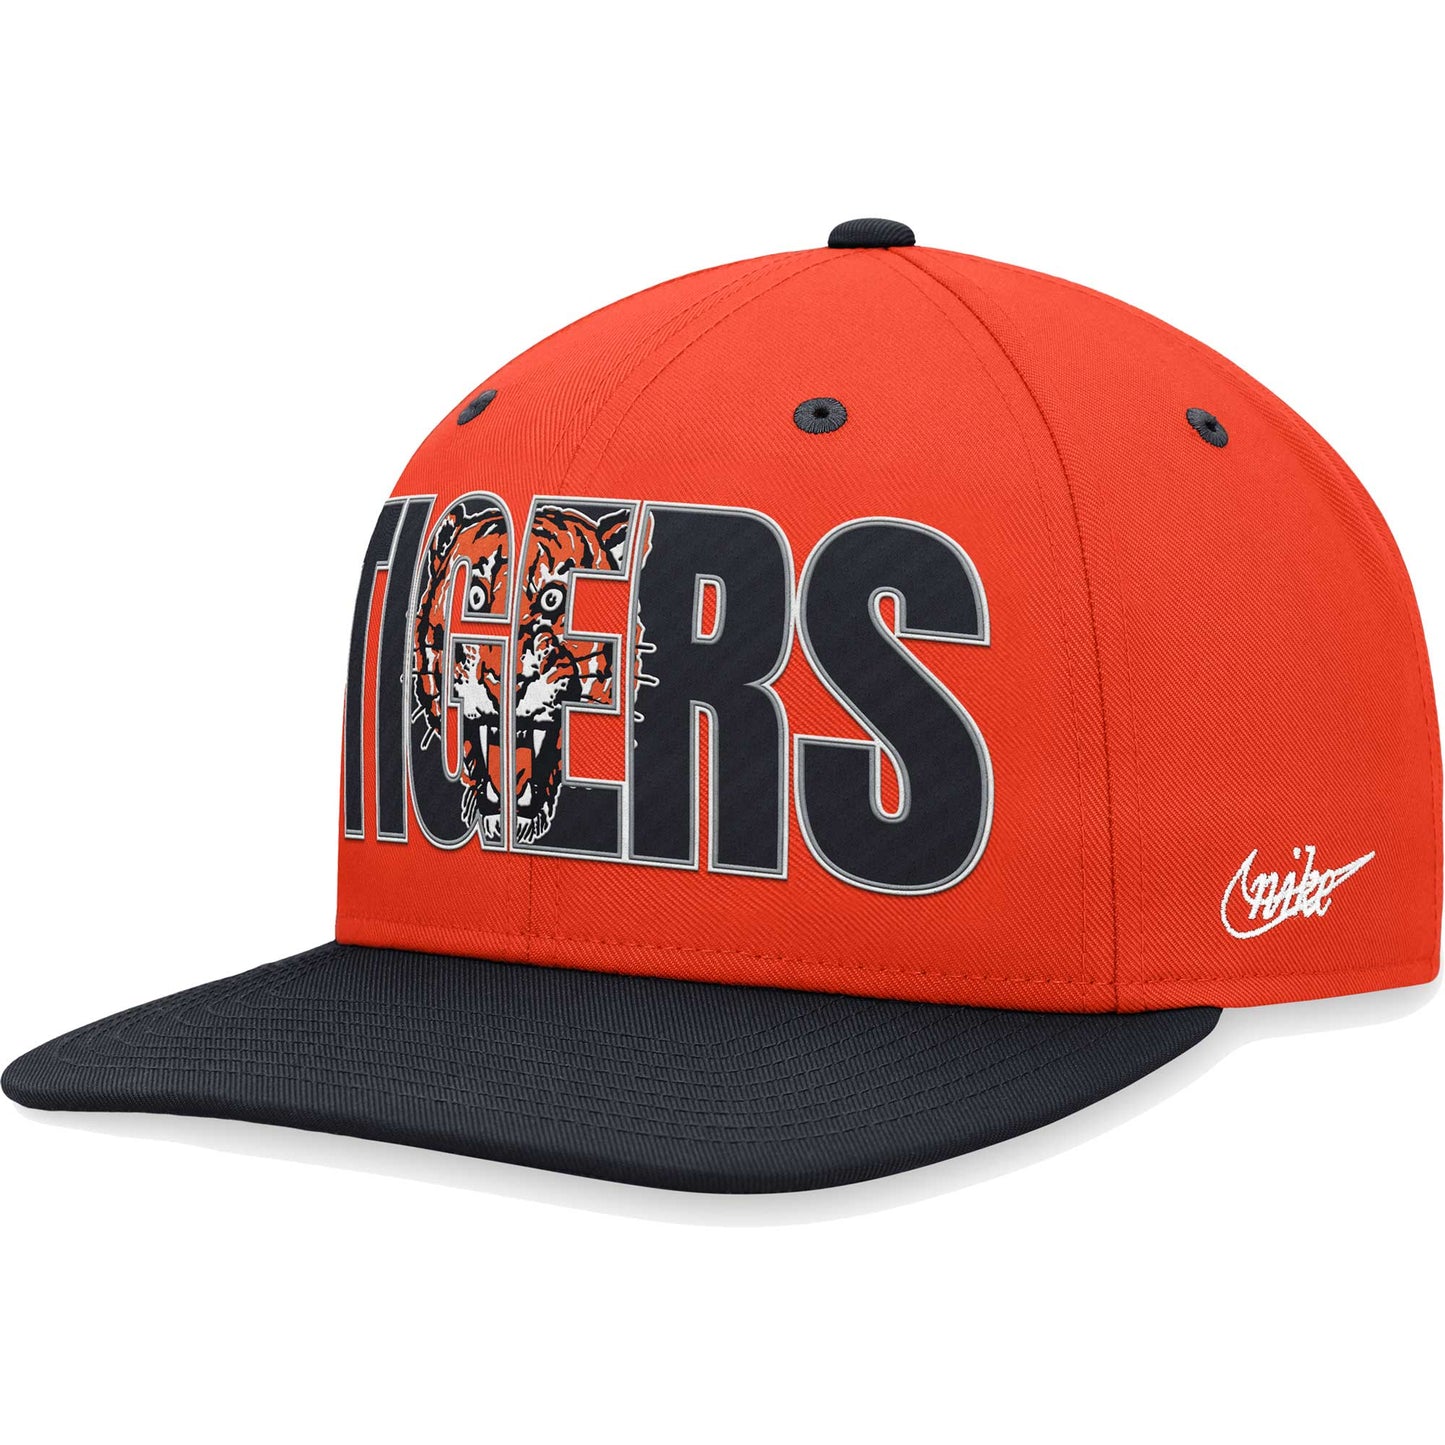 Detroit Tigers Nike Cooperstown Collection Pro Snapback Hat - Orange